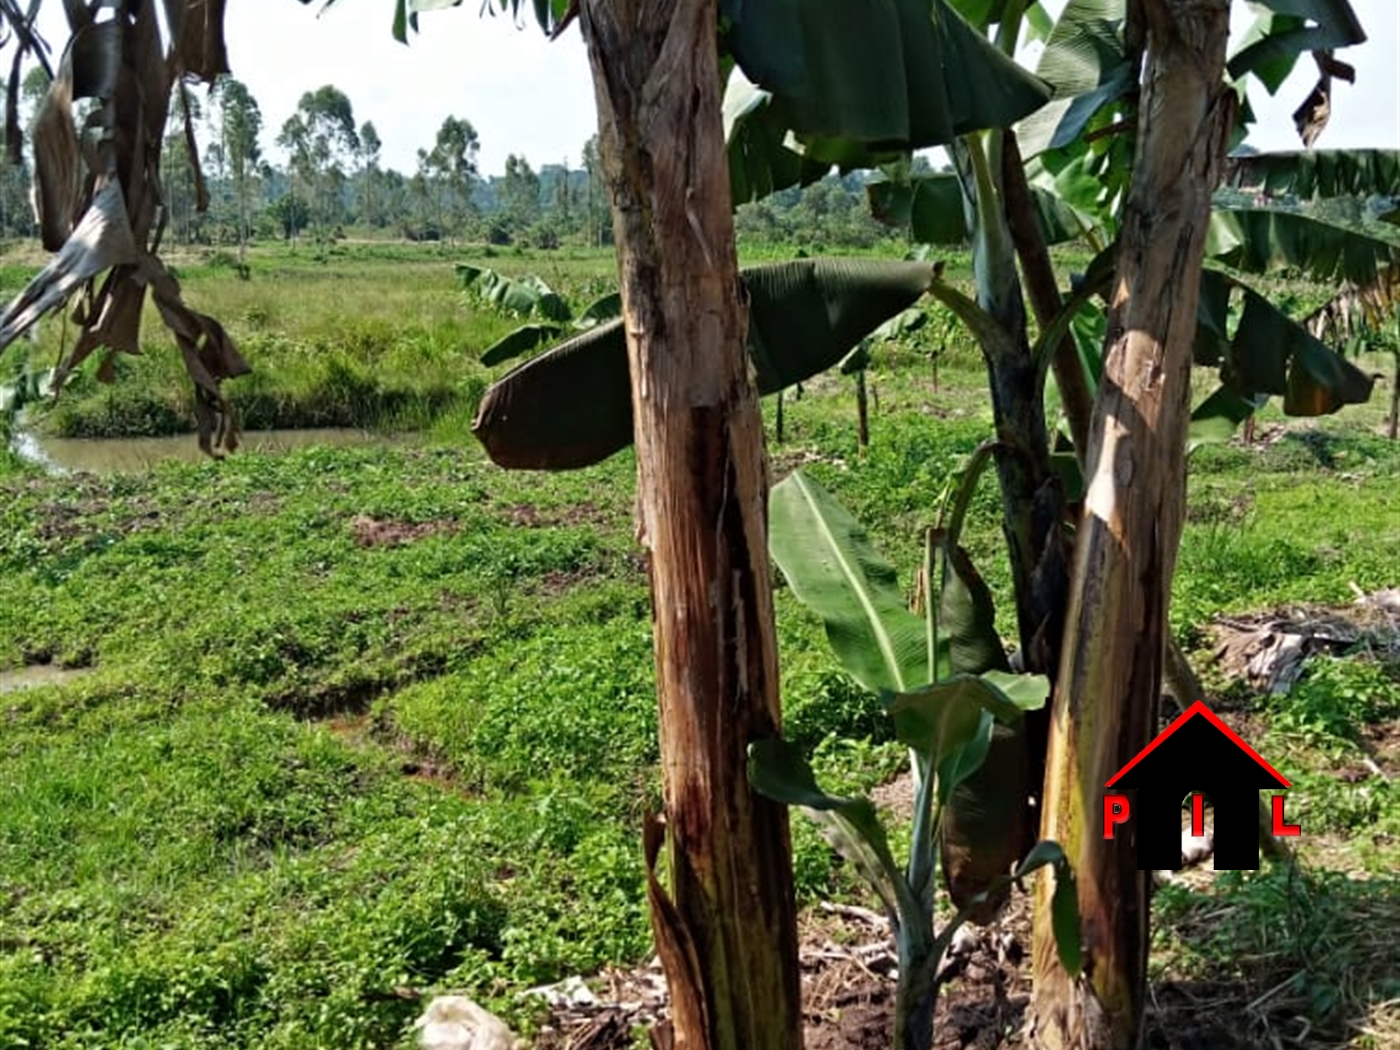 Agricultural Land for sale in Bombo Luwero